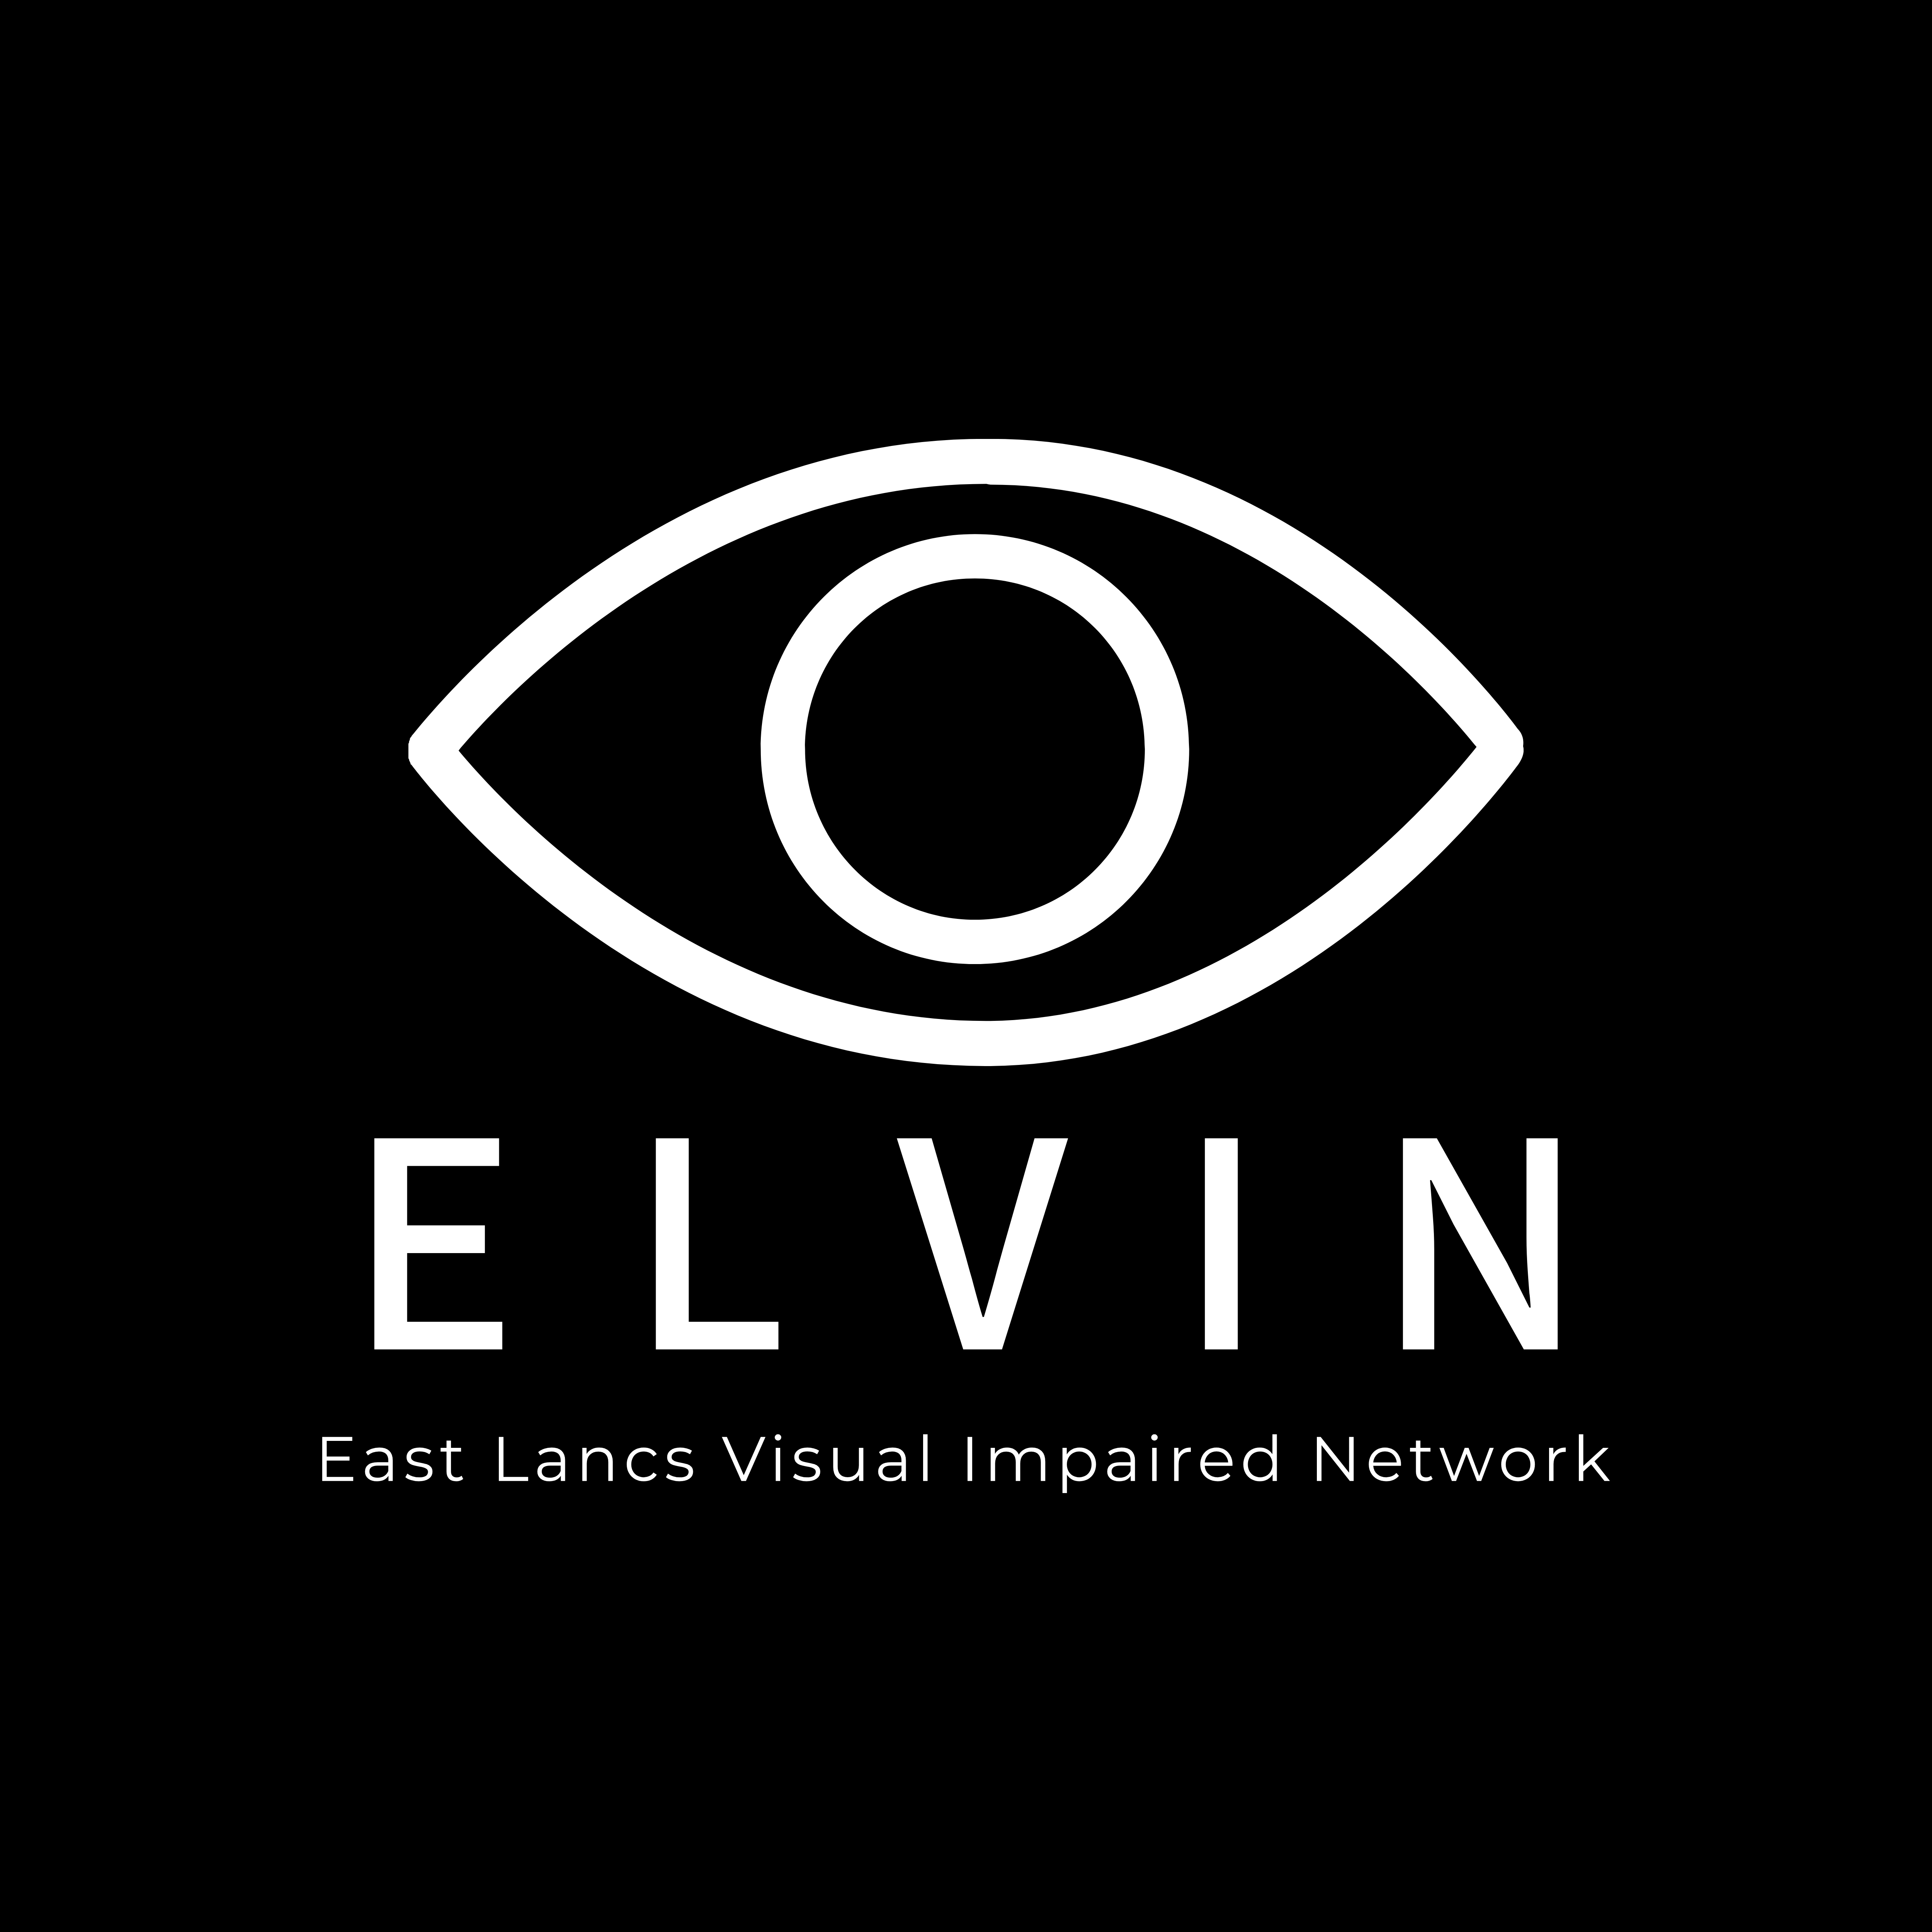 East Lancs Visually Impaired Network